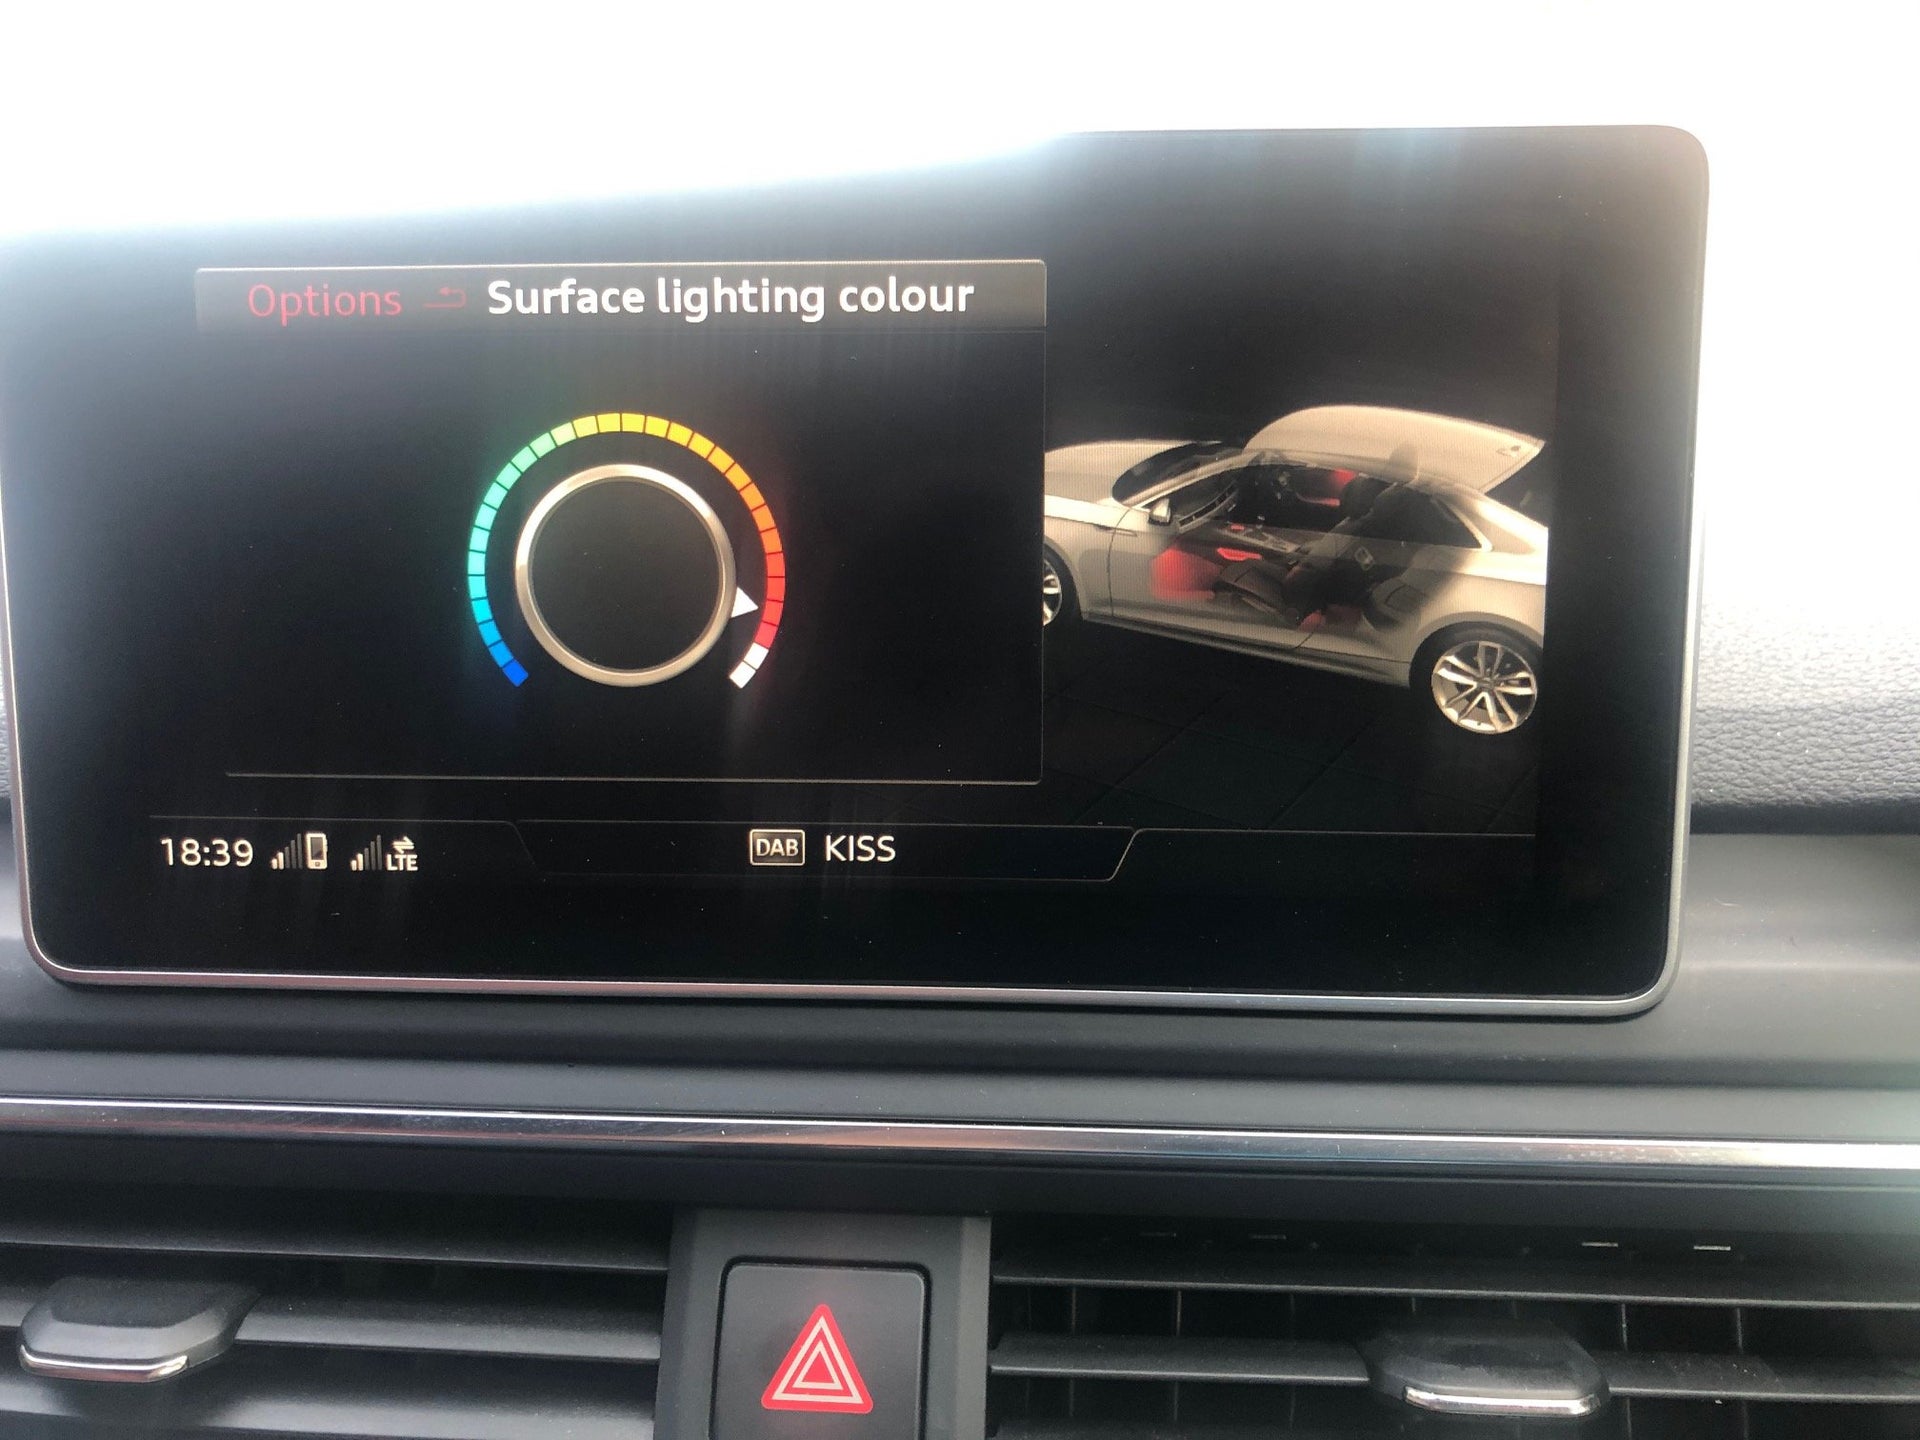 Retrofit Upgrade From Standard White Led To Colour Interior Ambient Lighting Audi A5 Forum S5